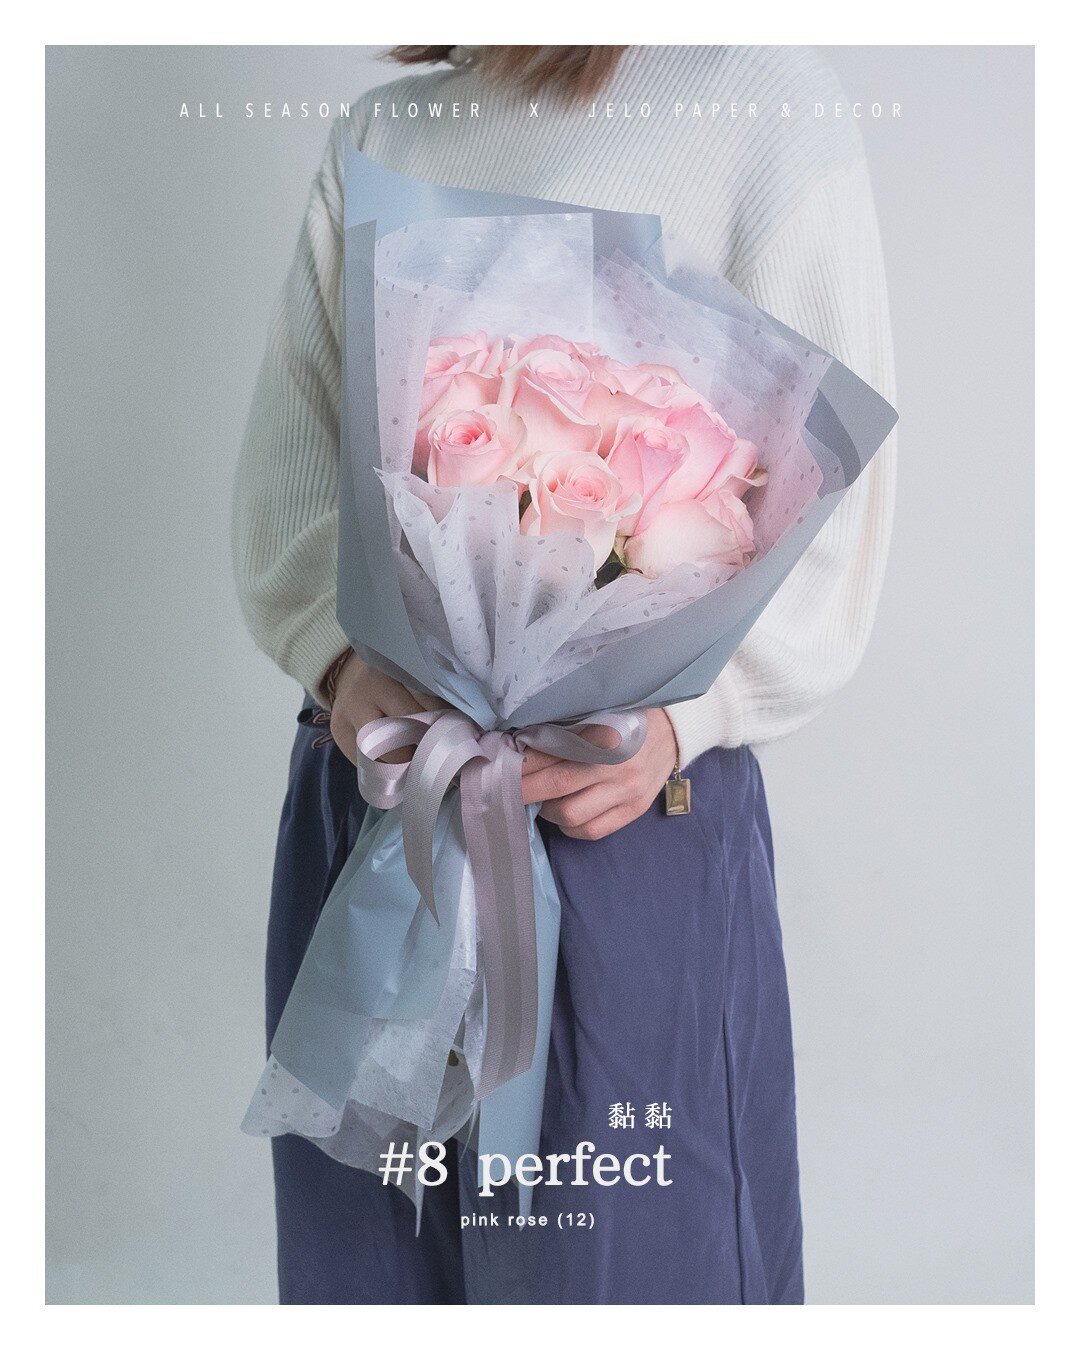 🌷 Valentine's flowers collection

#8 Perfect 
黏黏

15% off (1/4 - 1/25)

Free! Lyrics message card

How to order : 
Message us or Online order : 
www.allseasonflower.com/vday21

$12 Delivery flat rate to 5 boroughs
Free pick up in Brooklyn location

